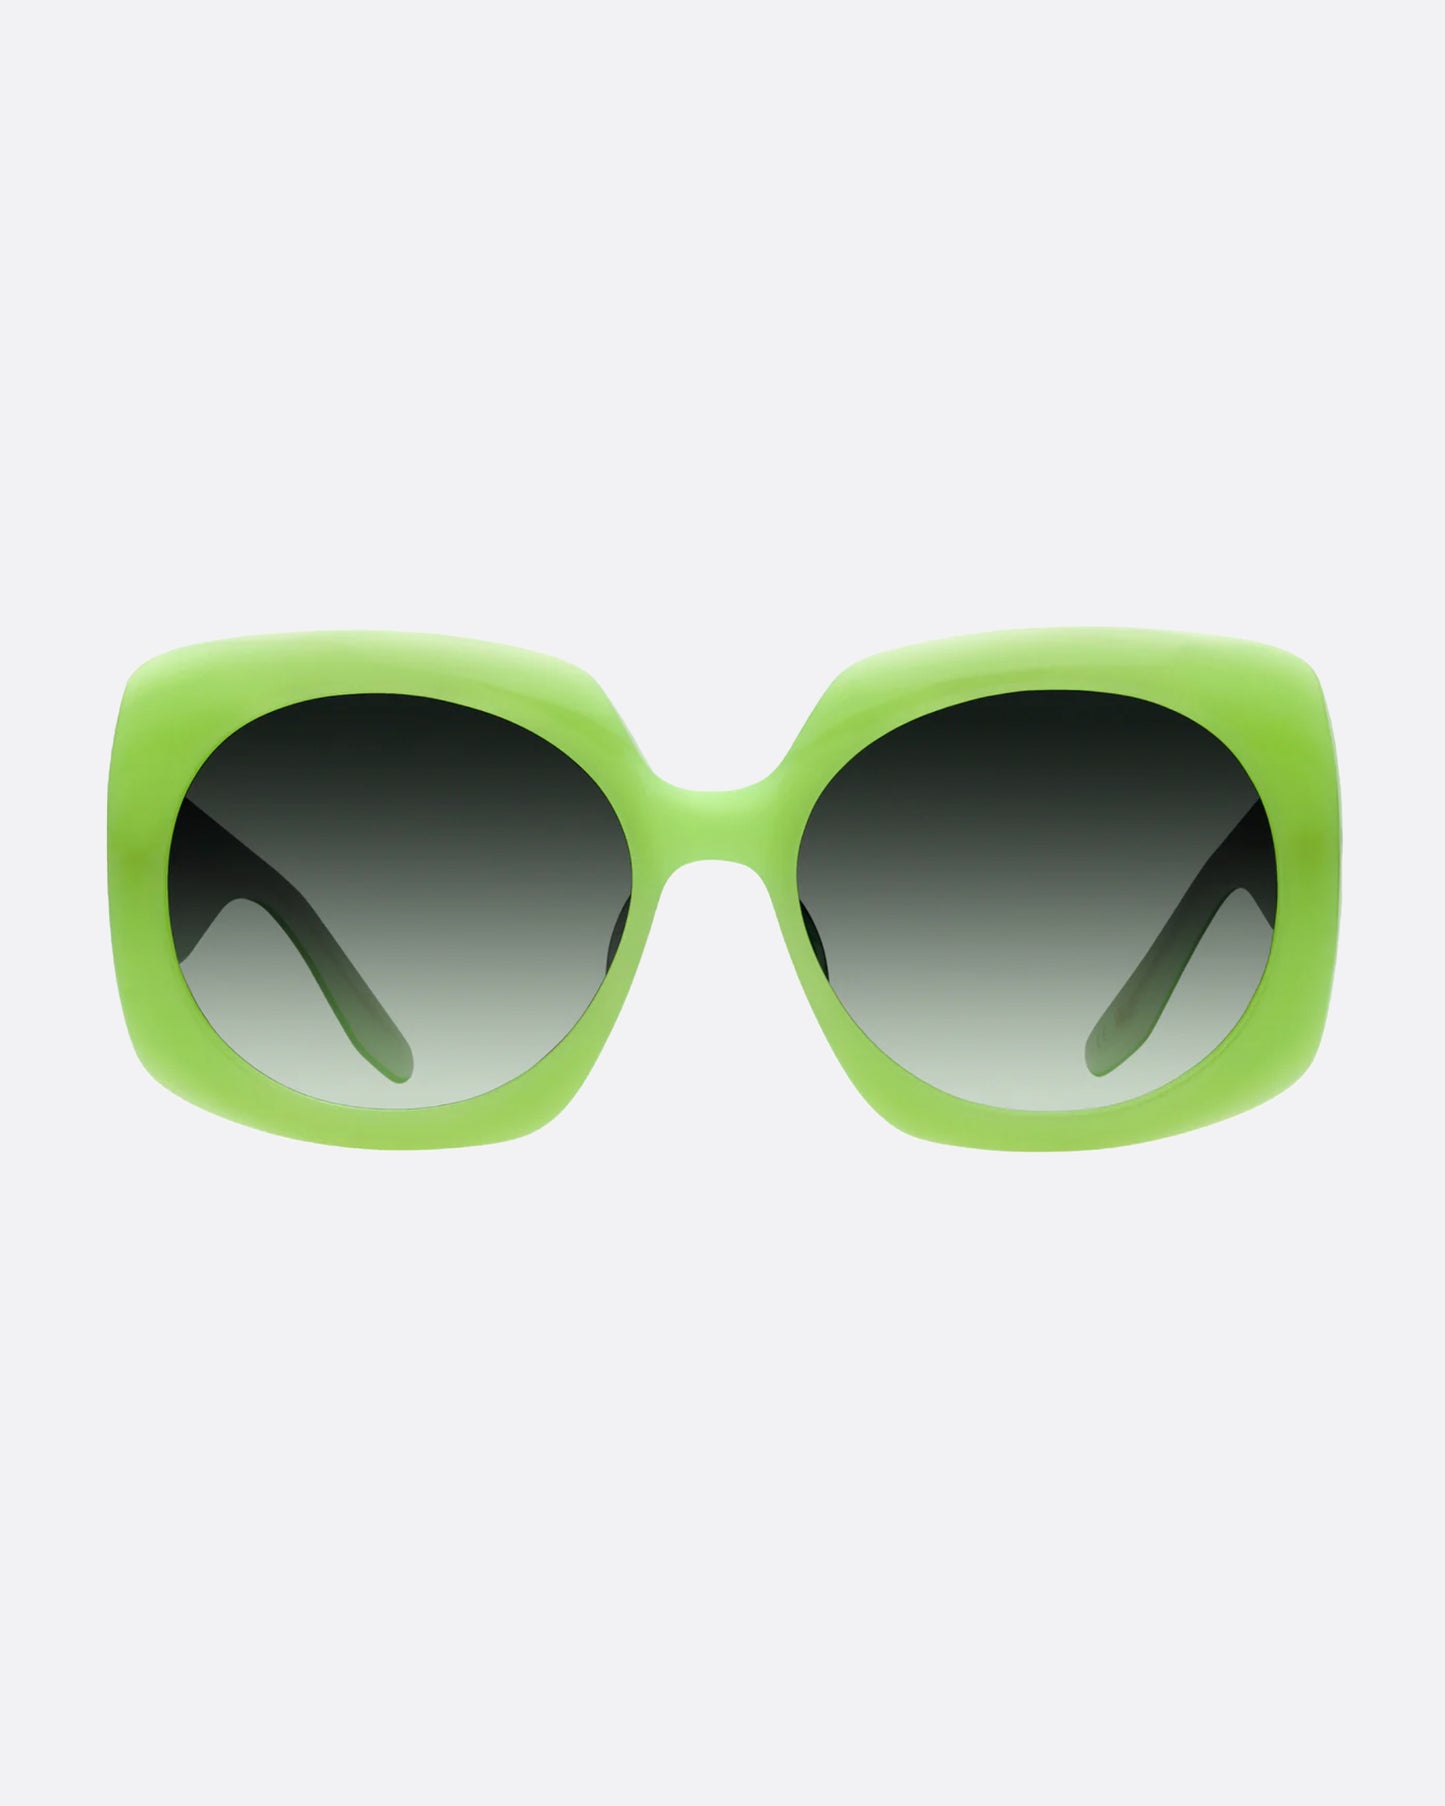 These vibrant Limelight frames with Julep green lenses have a mod edge.